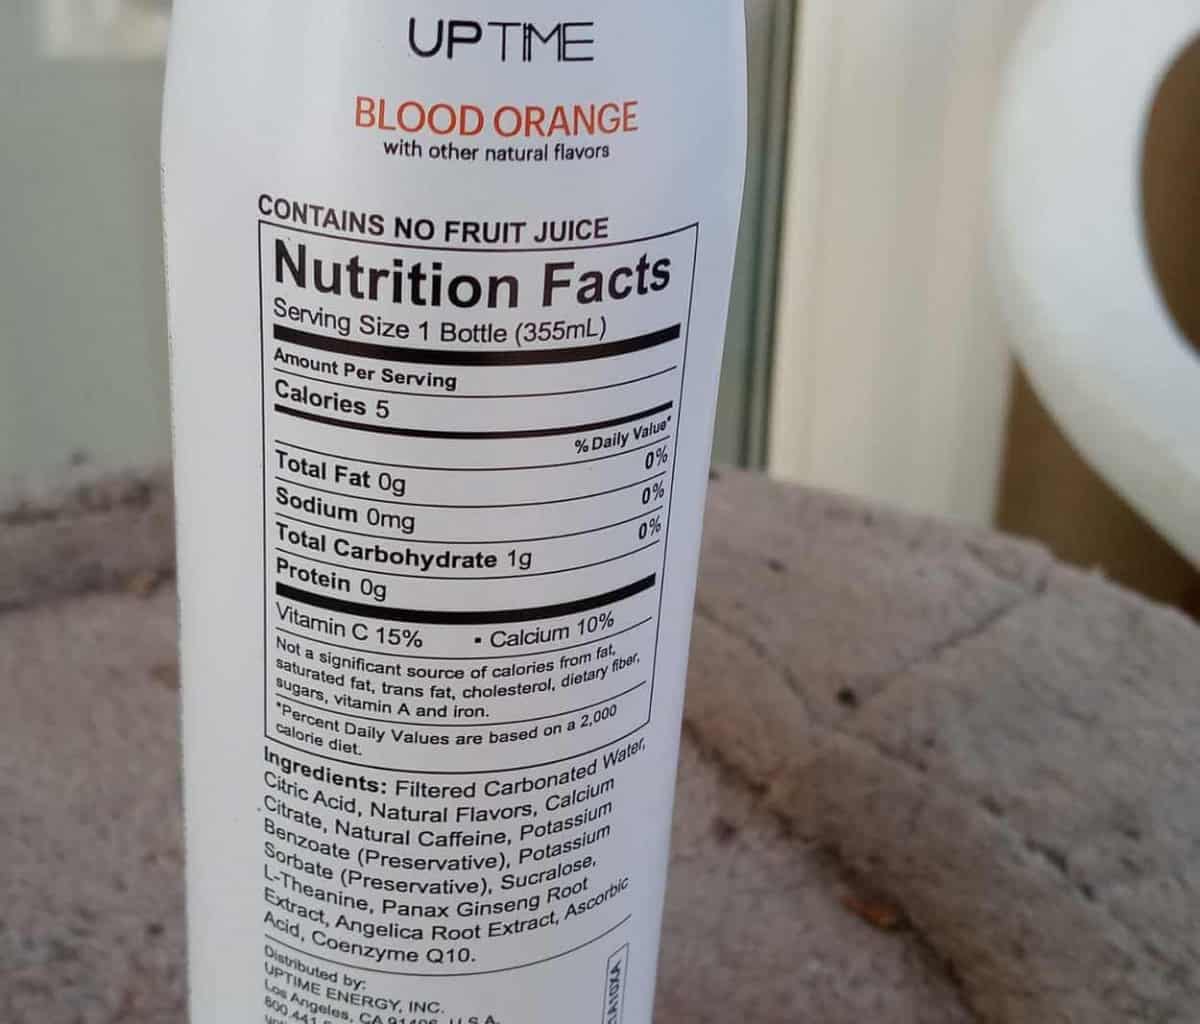 Nutrition facts of Uptime Sugar-free.